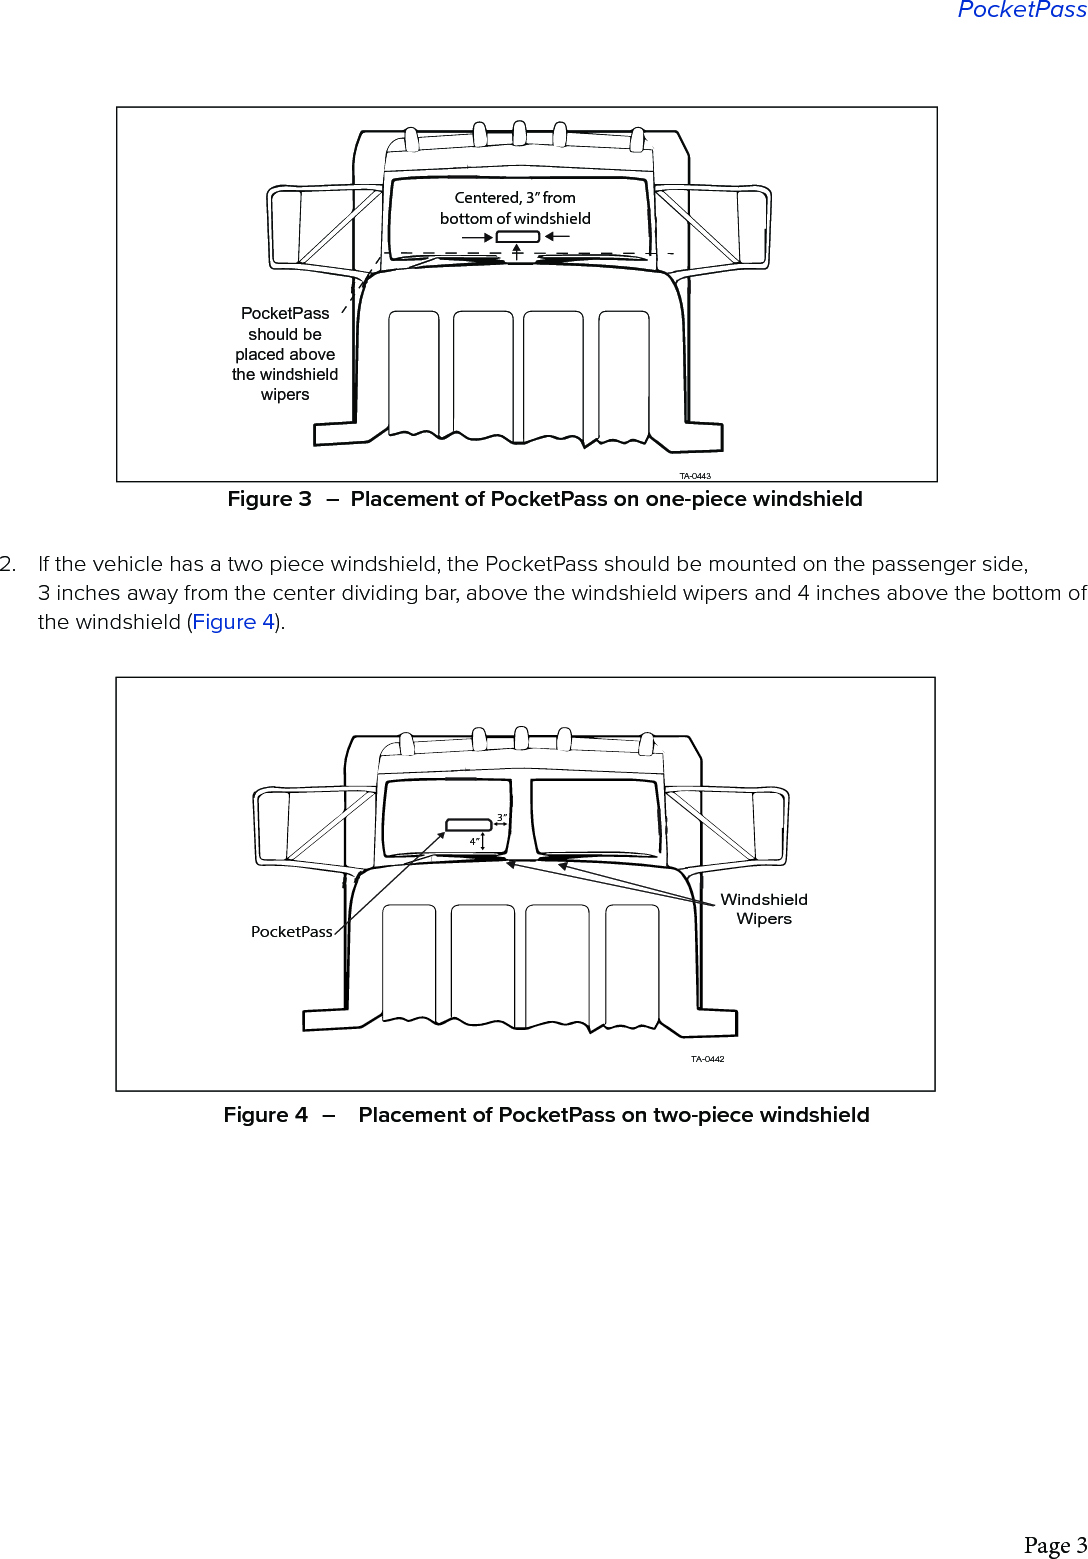 Page 3PocketPass2.  If the vehicle has a two piece windshield, the PocketPass should be mounted on the passenger side,  3 inches away from the center dividing bar, above the windshield wipers and 4 inches above the bottom of the windshield (Figure 4).PocketPass should be placed above the windshieldwipersTA-0443Centered, 3” from bottom of windshieldFigure 3  –  Placement of PocketPass on one-piece windshieldWindshieldWipersTA-0442PocketPass4”3”Figure 4  –    Placement of PocketPass on two-piece windshield